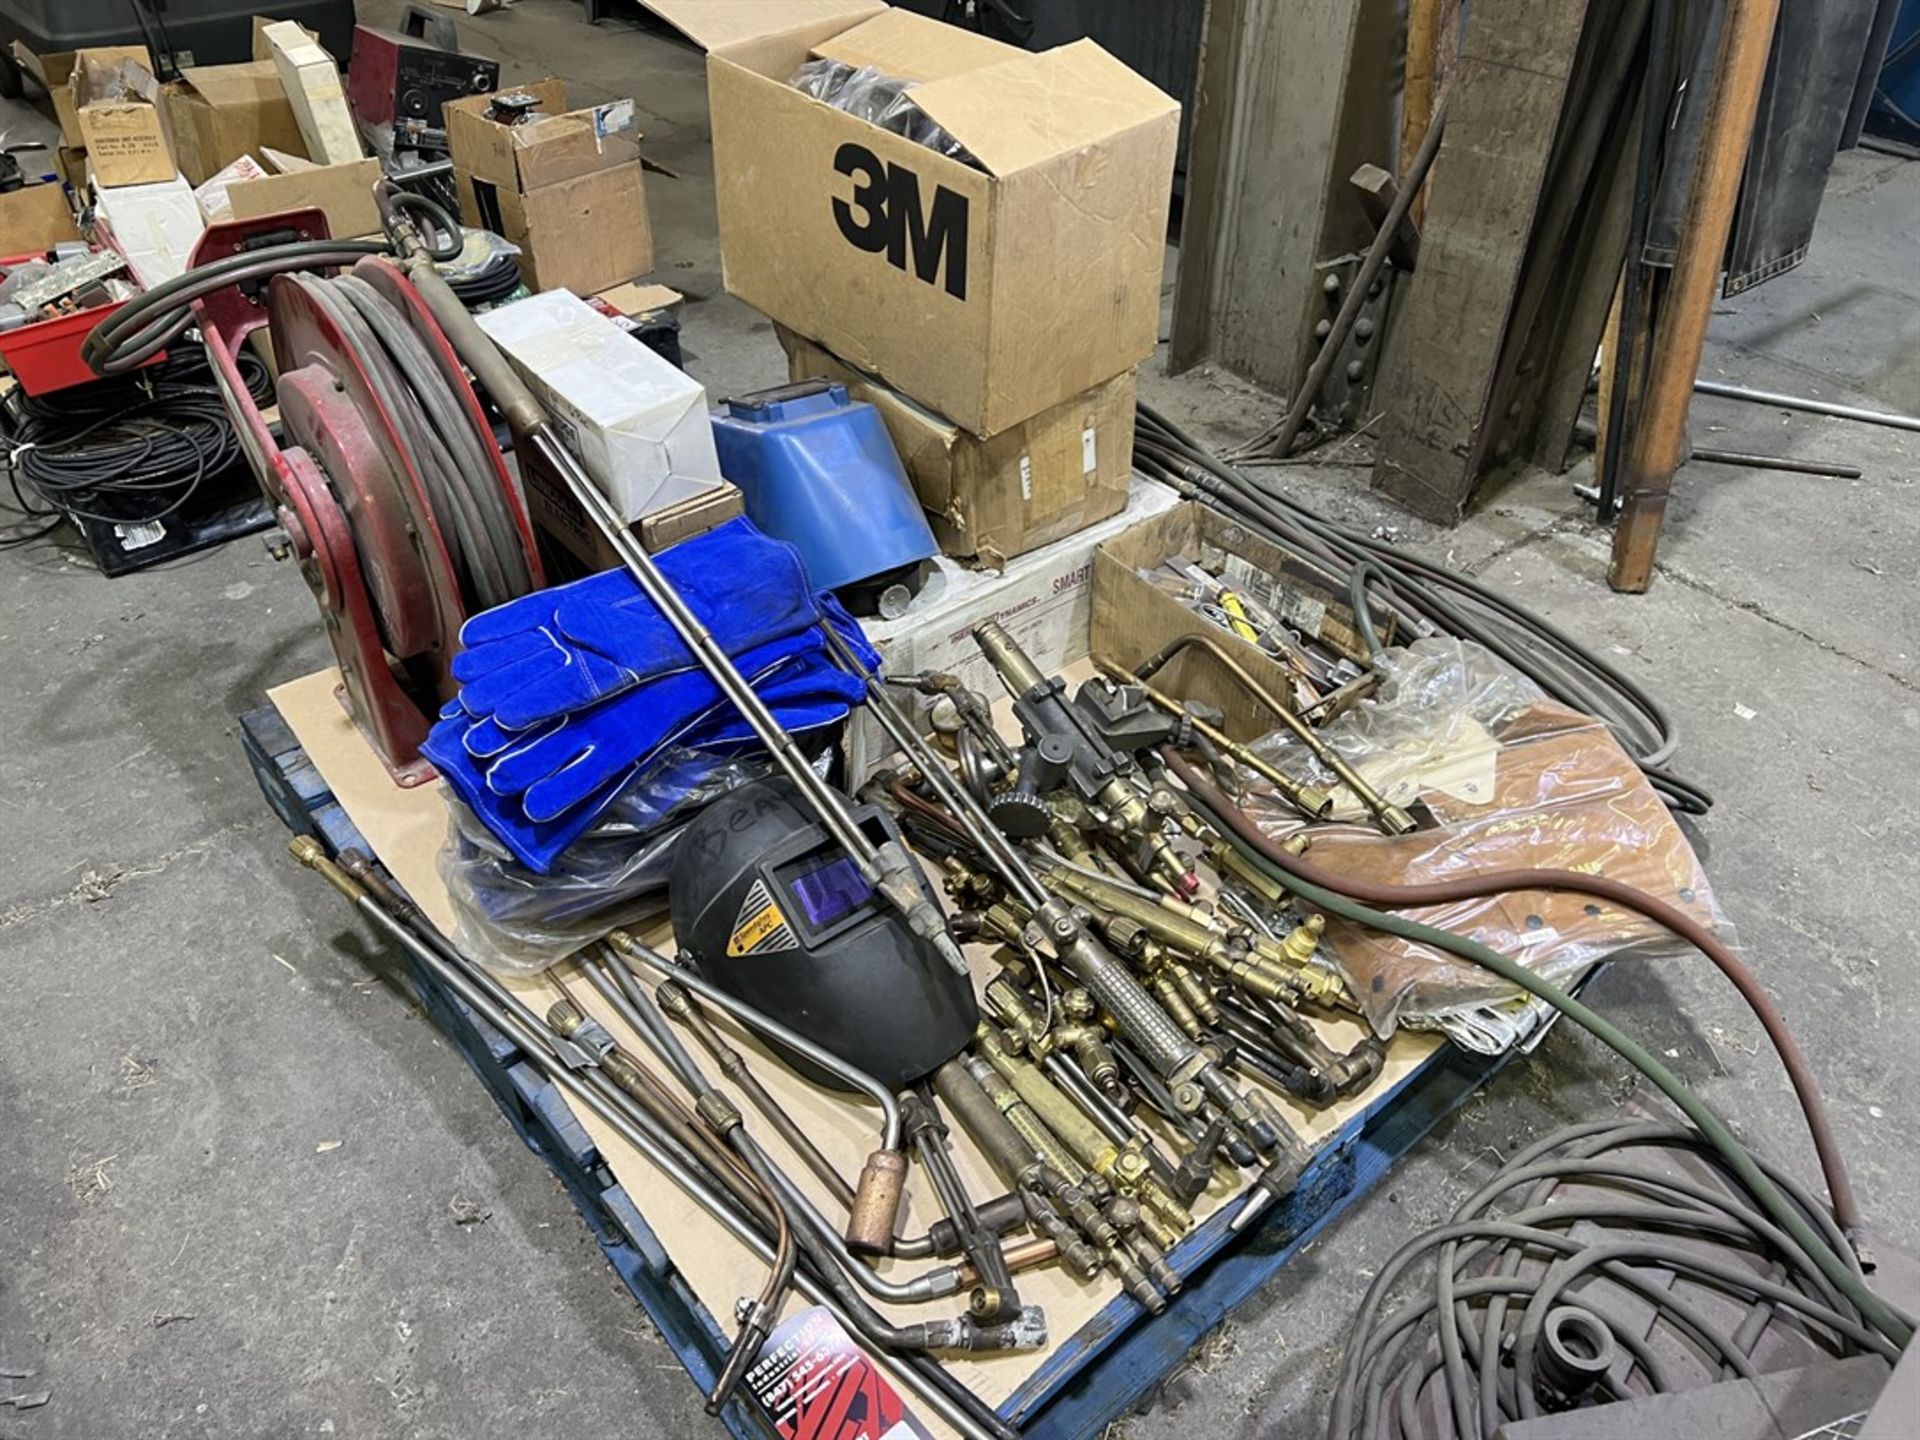 Pallet Comprising Cutting Torches, Welding Gloves, Welding Masks, MIG Wire and Oxy/Acetylene Hose